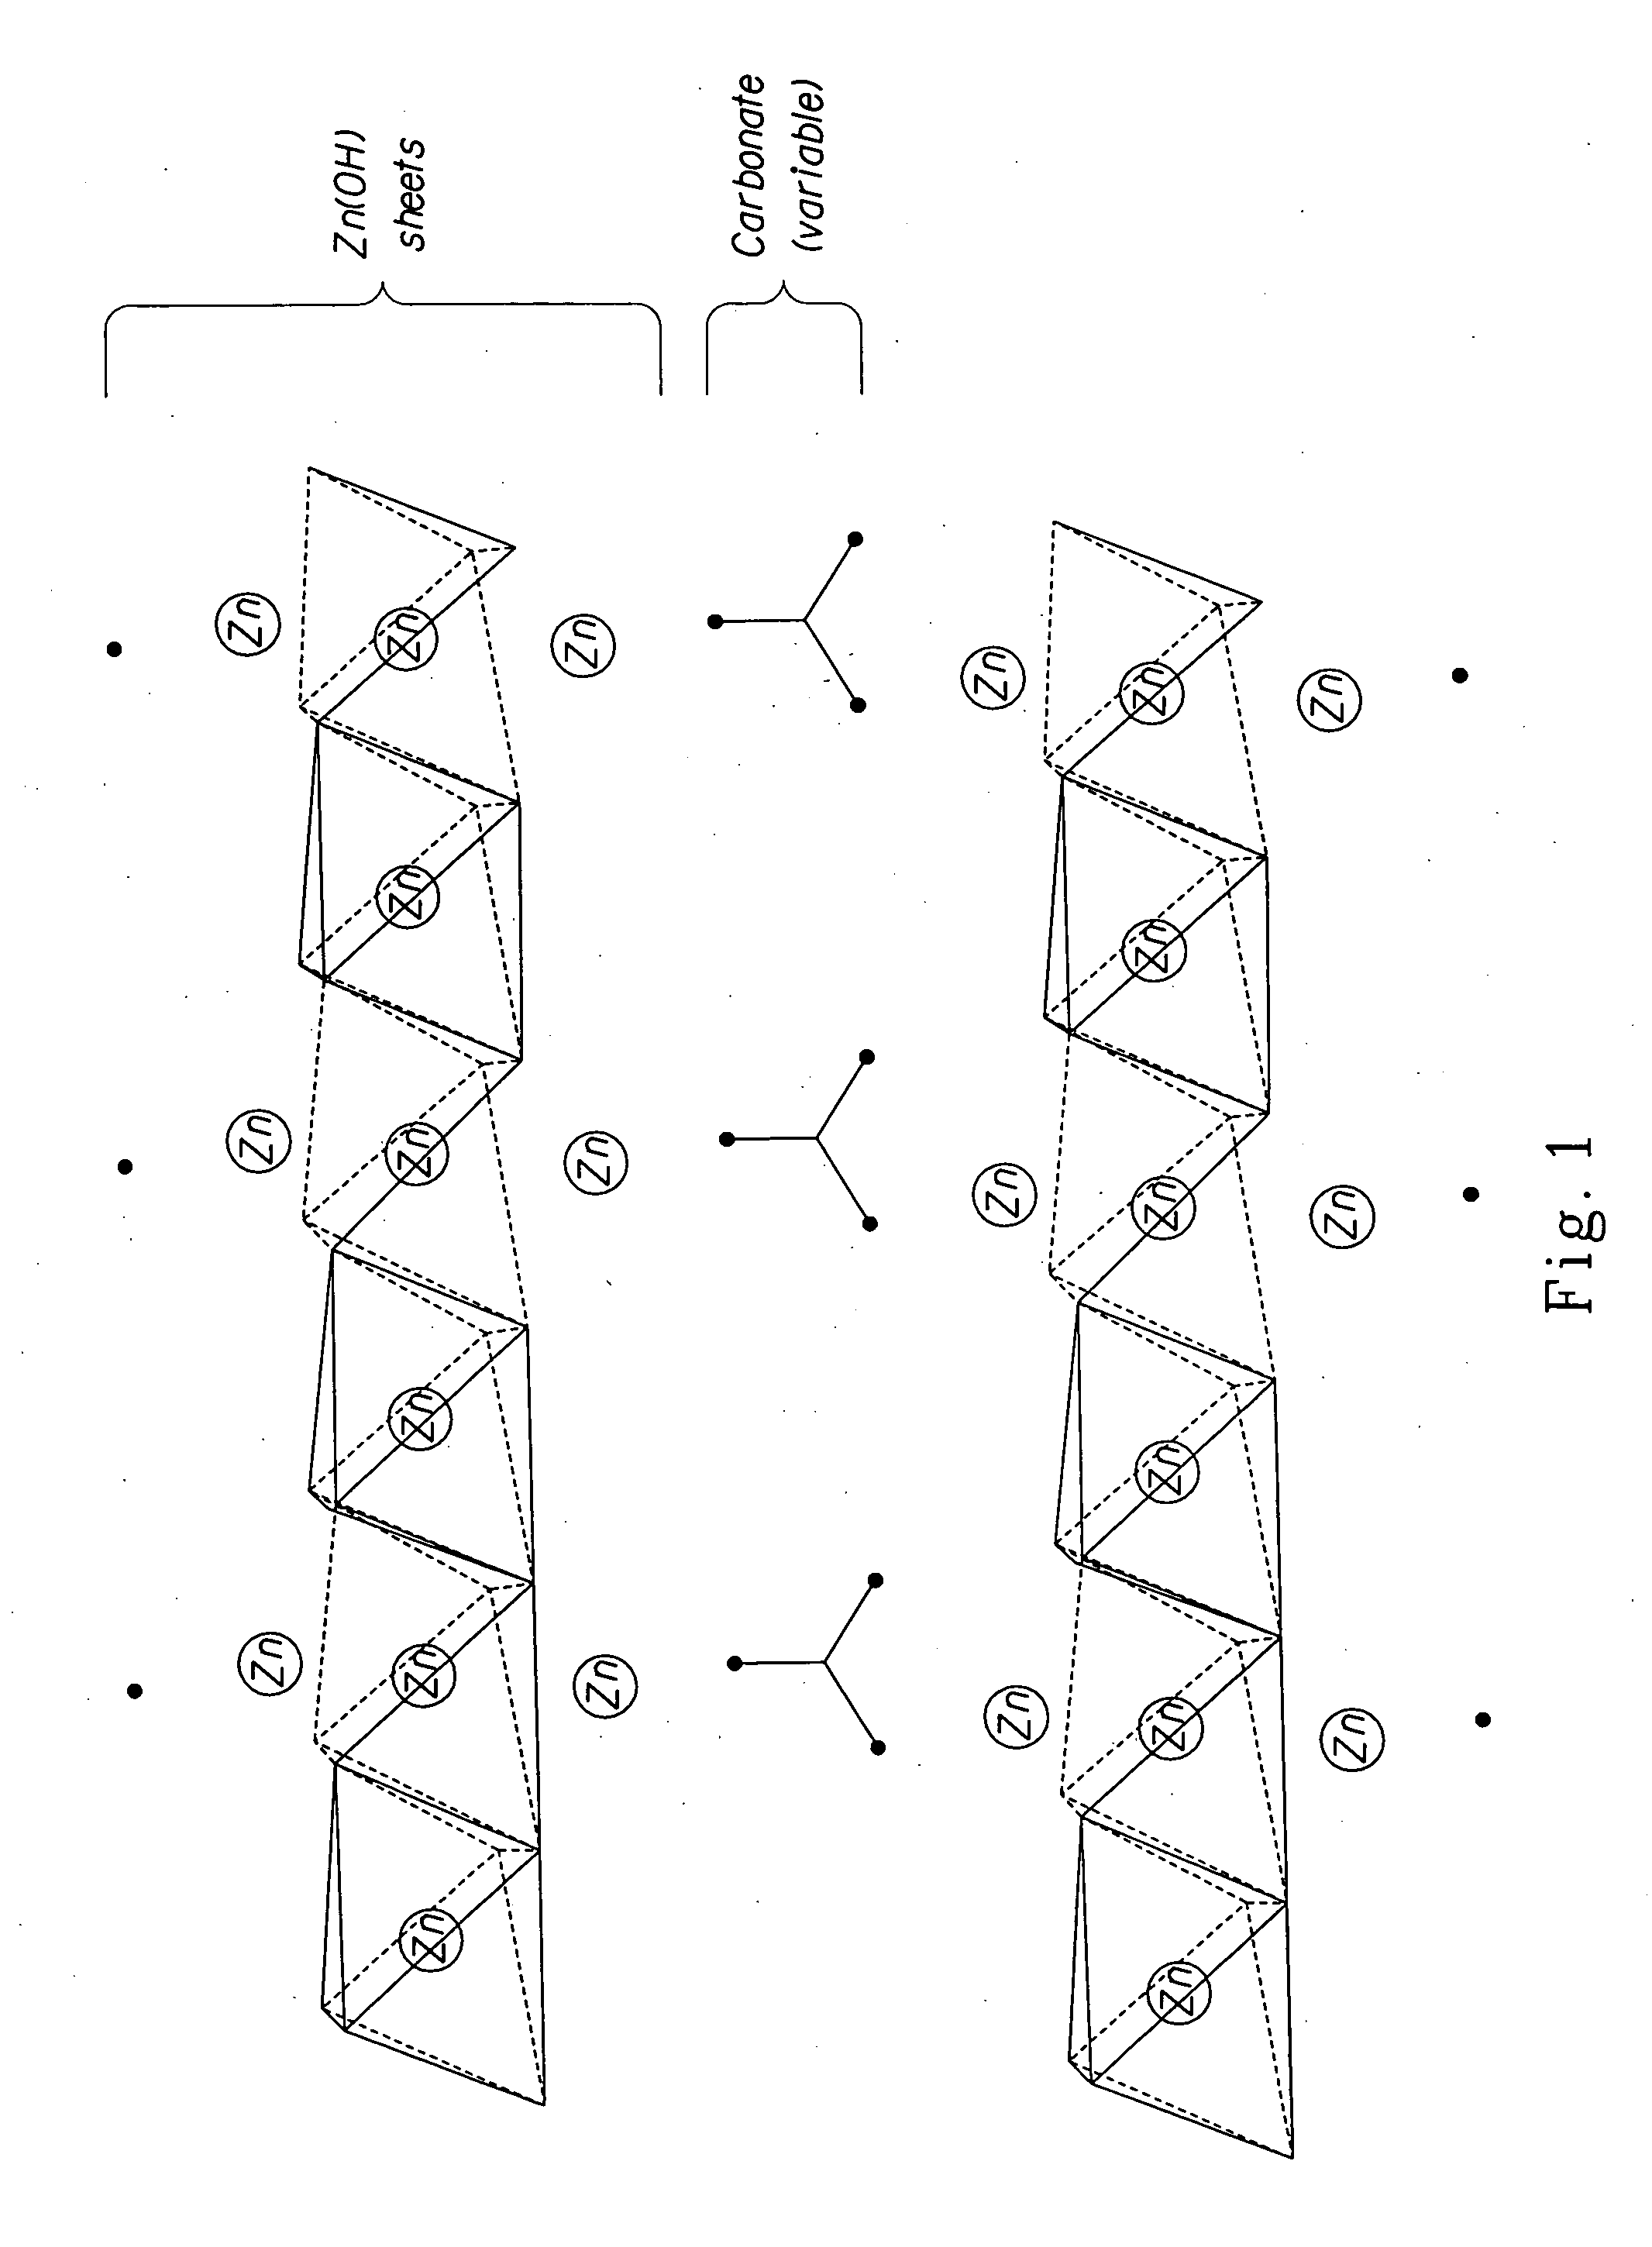 Methods for protecting glassware from surface corrosion in automatic dishwashing appliances